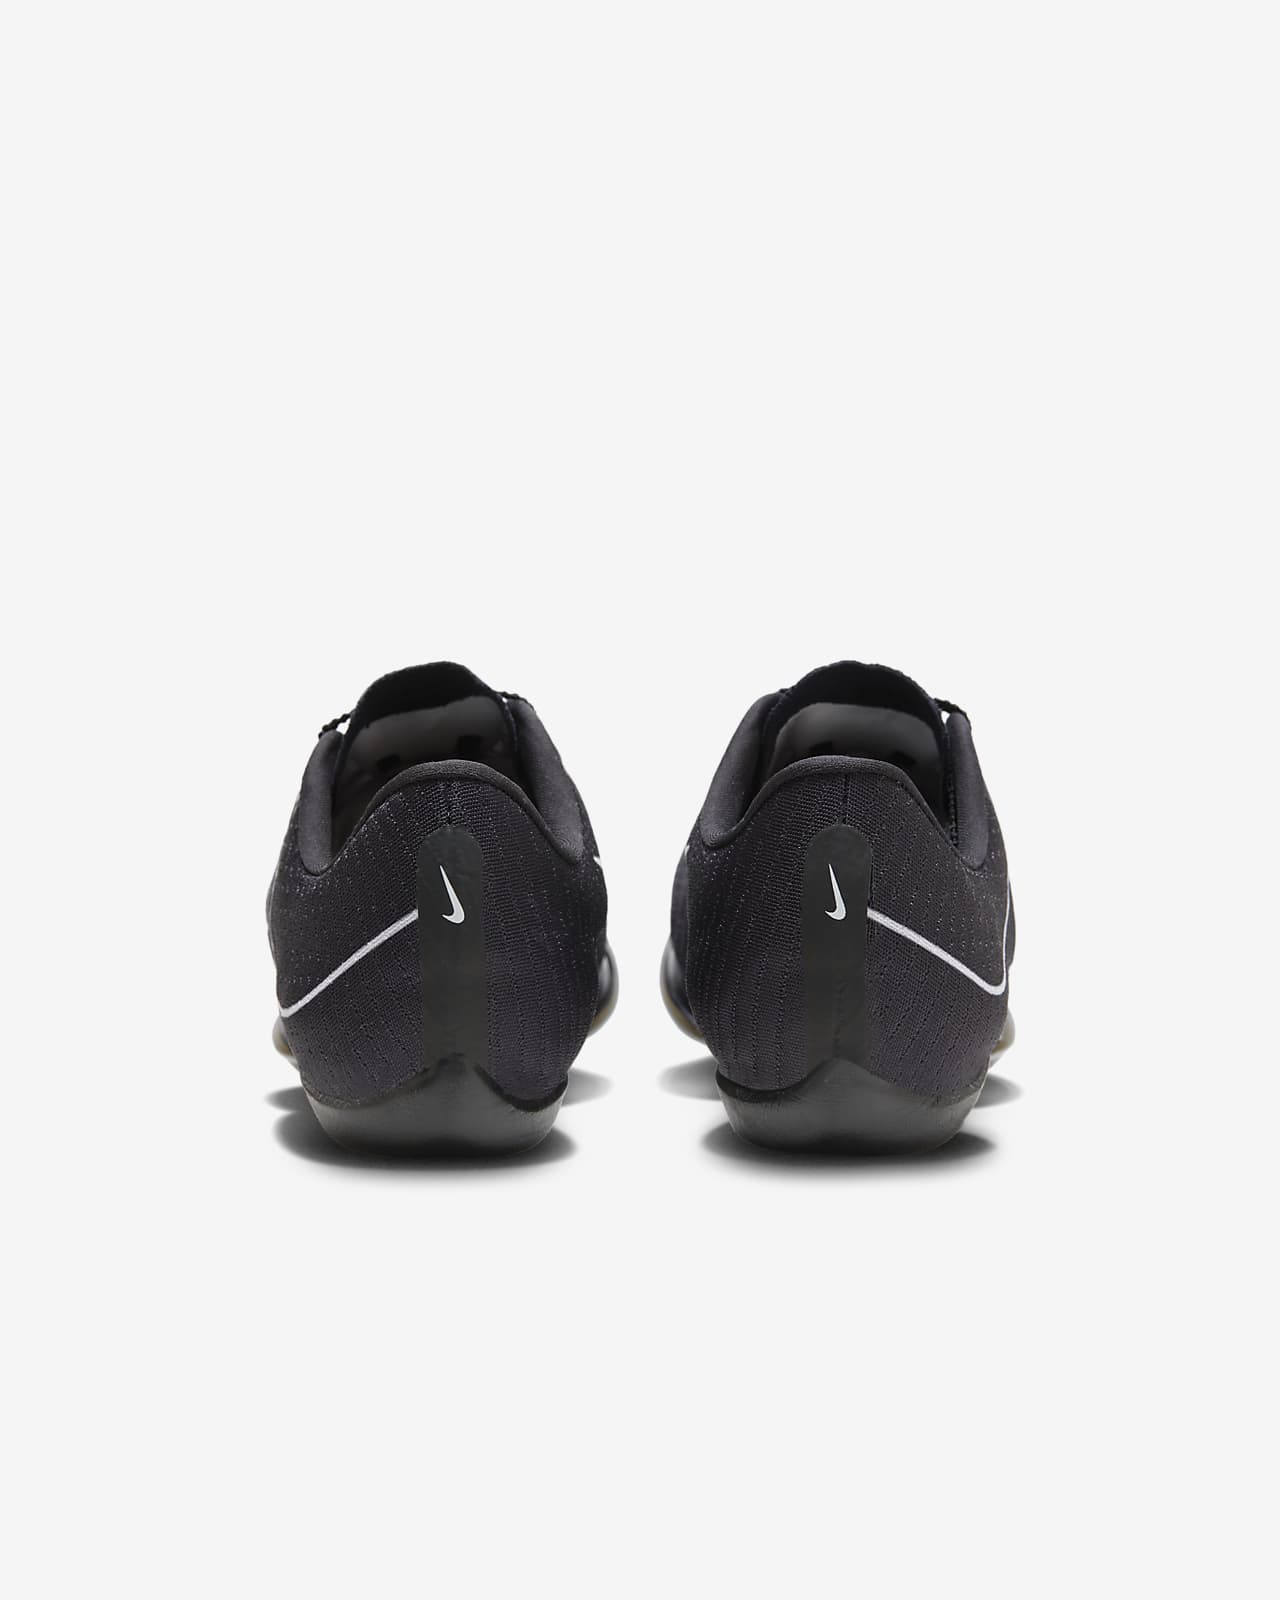 Nike Air Zoom Maxfly More Uptempo Athletics Sprinting Spikes. Nike IN